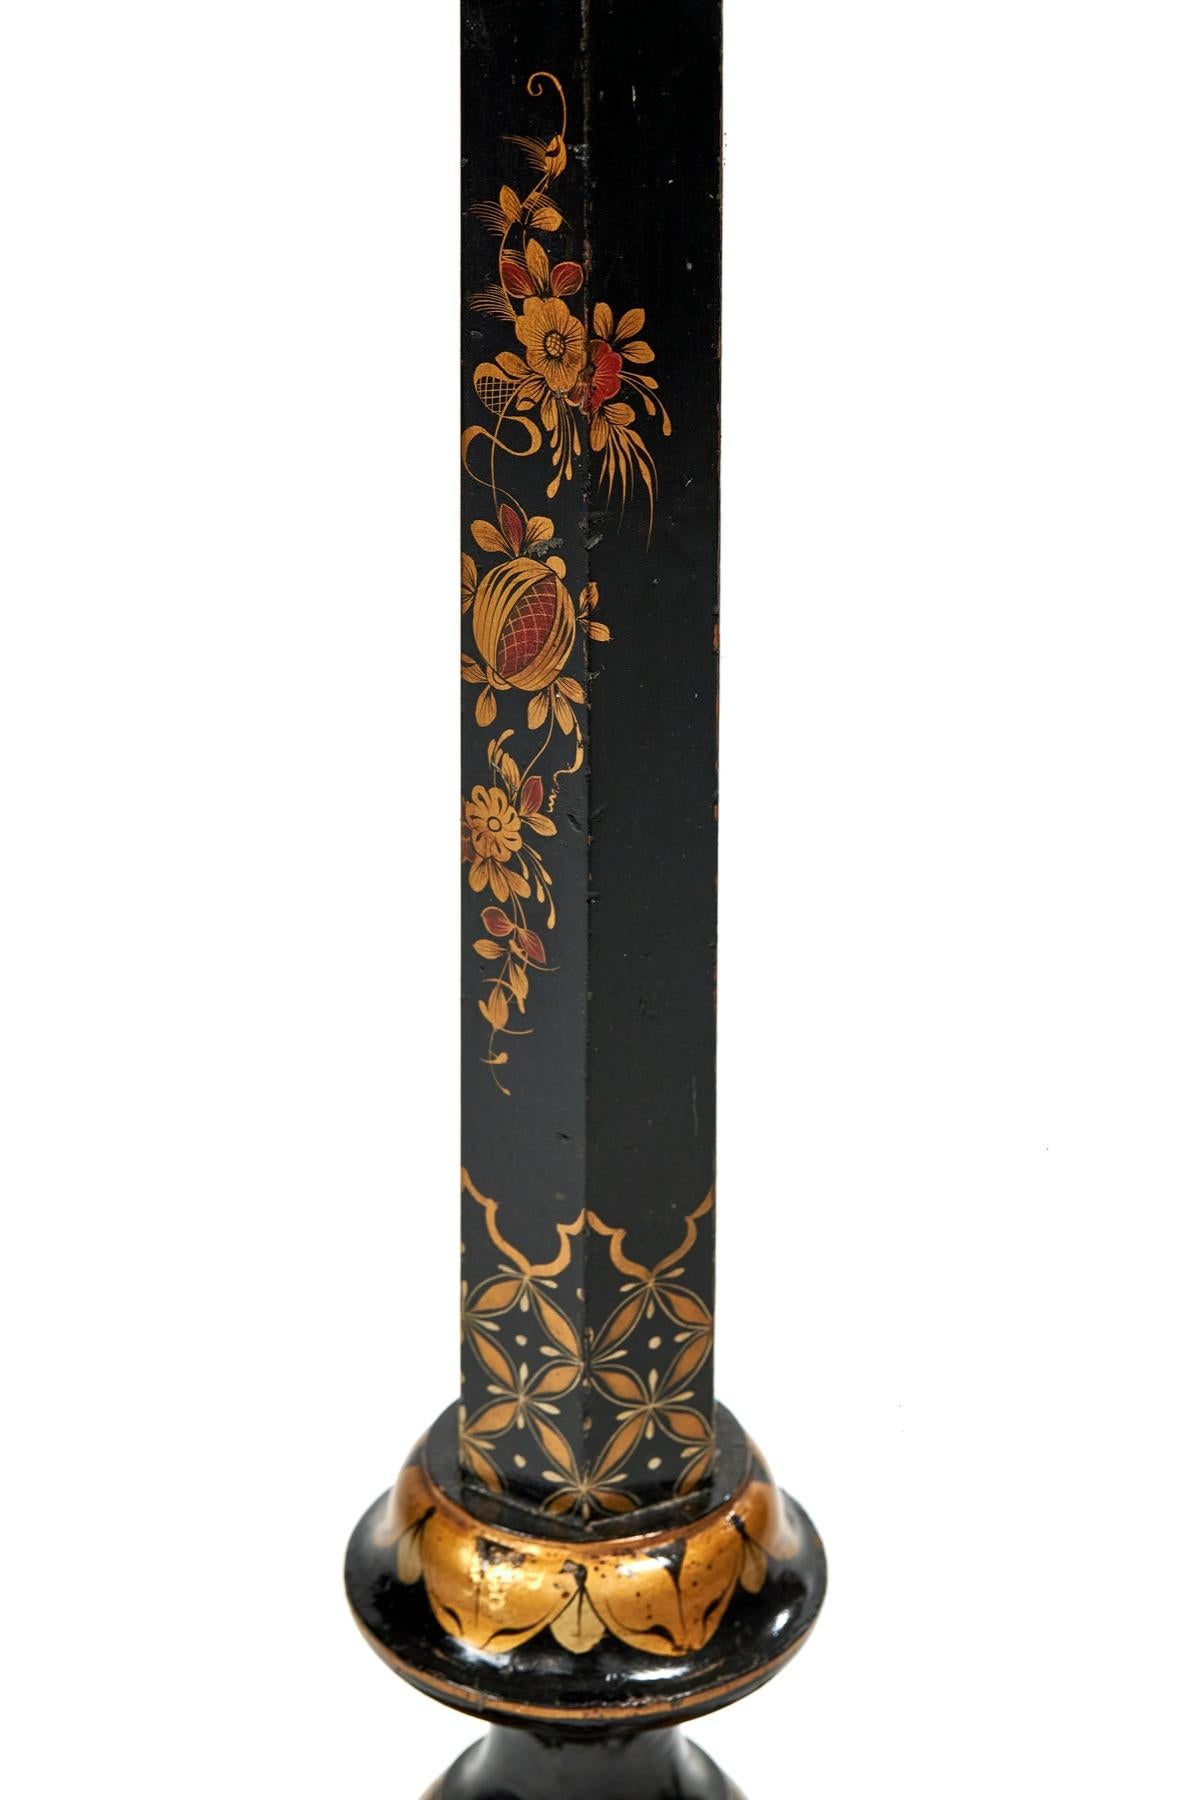 Chinoiserie Decorated Standard Lamp circa 1930s [B] For Sale 2